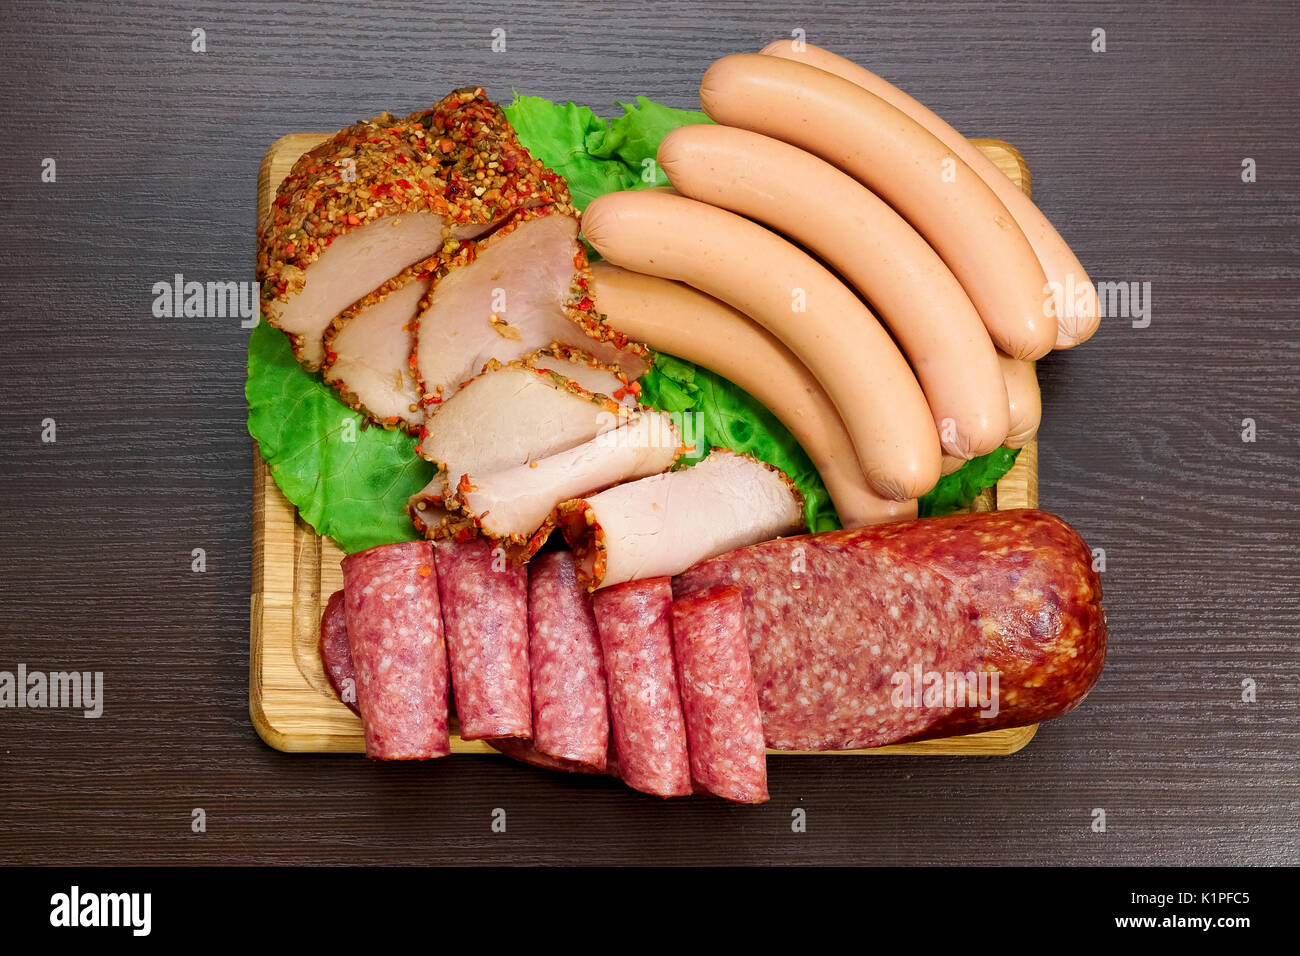 Assorted meat products including ham and sausages on cutting board. Top view Stock Photo